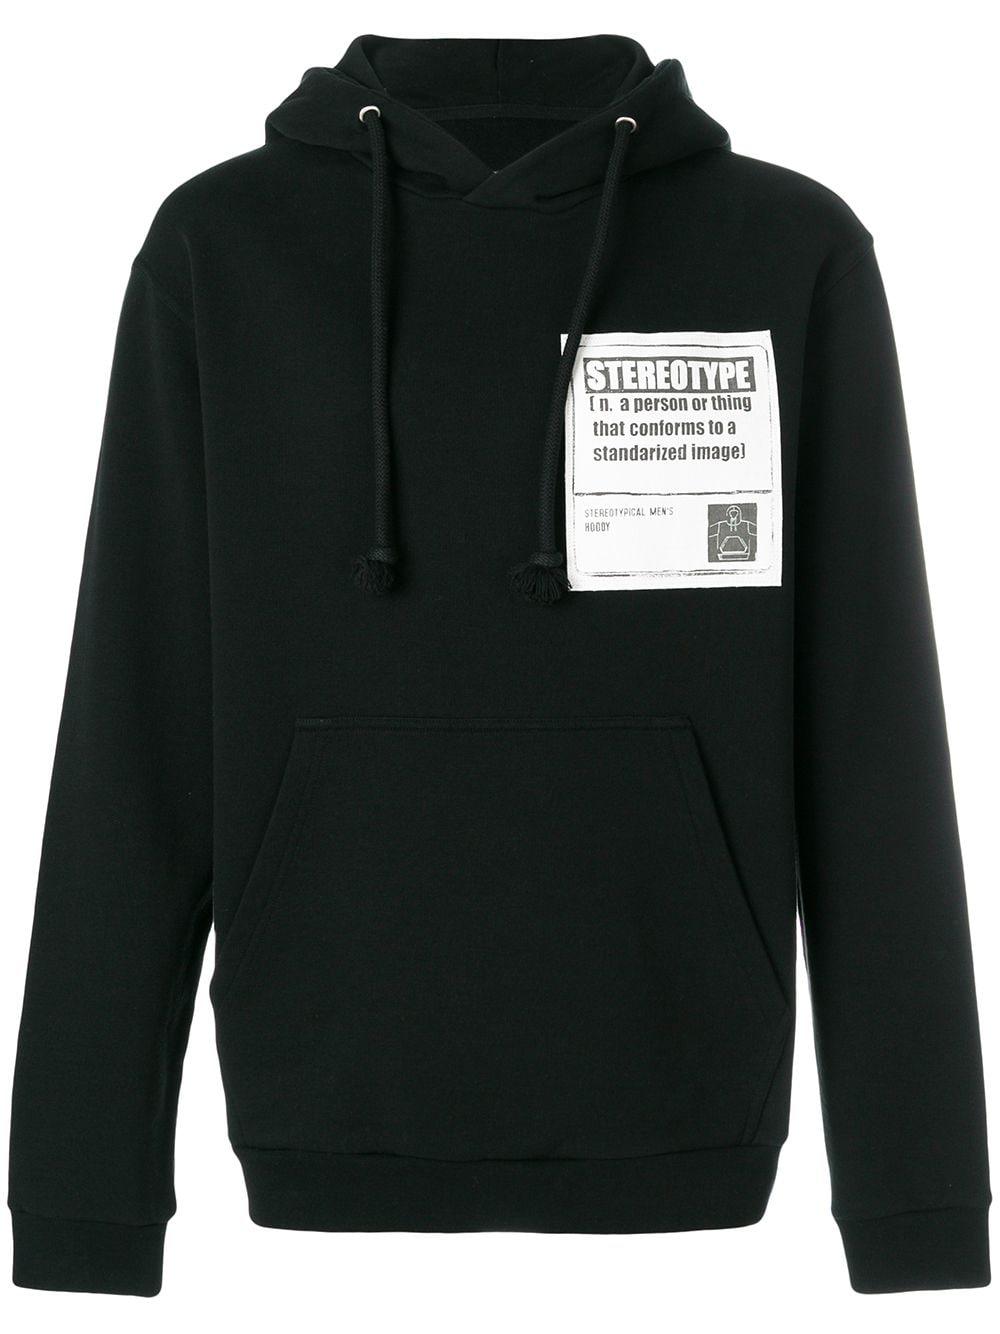 Maison Margiela Cotton Stereotype Hoodie in Black for Men - Save 75% - Lyst